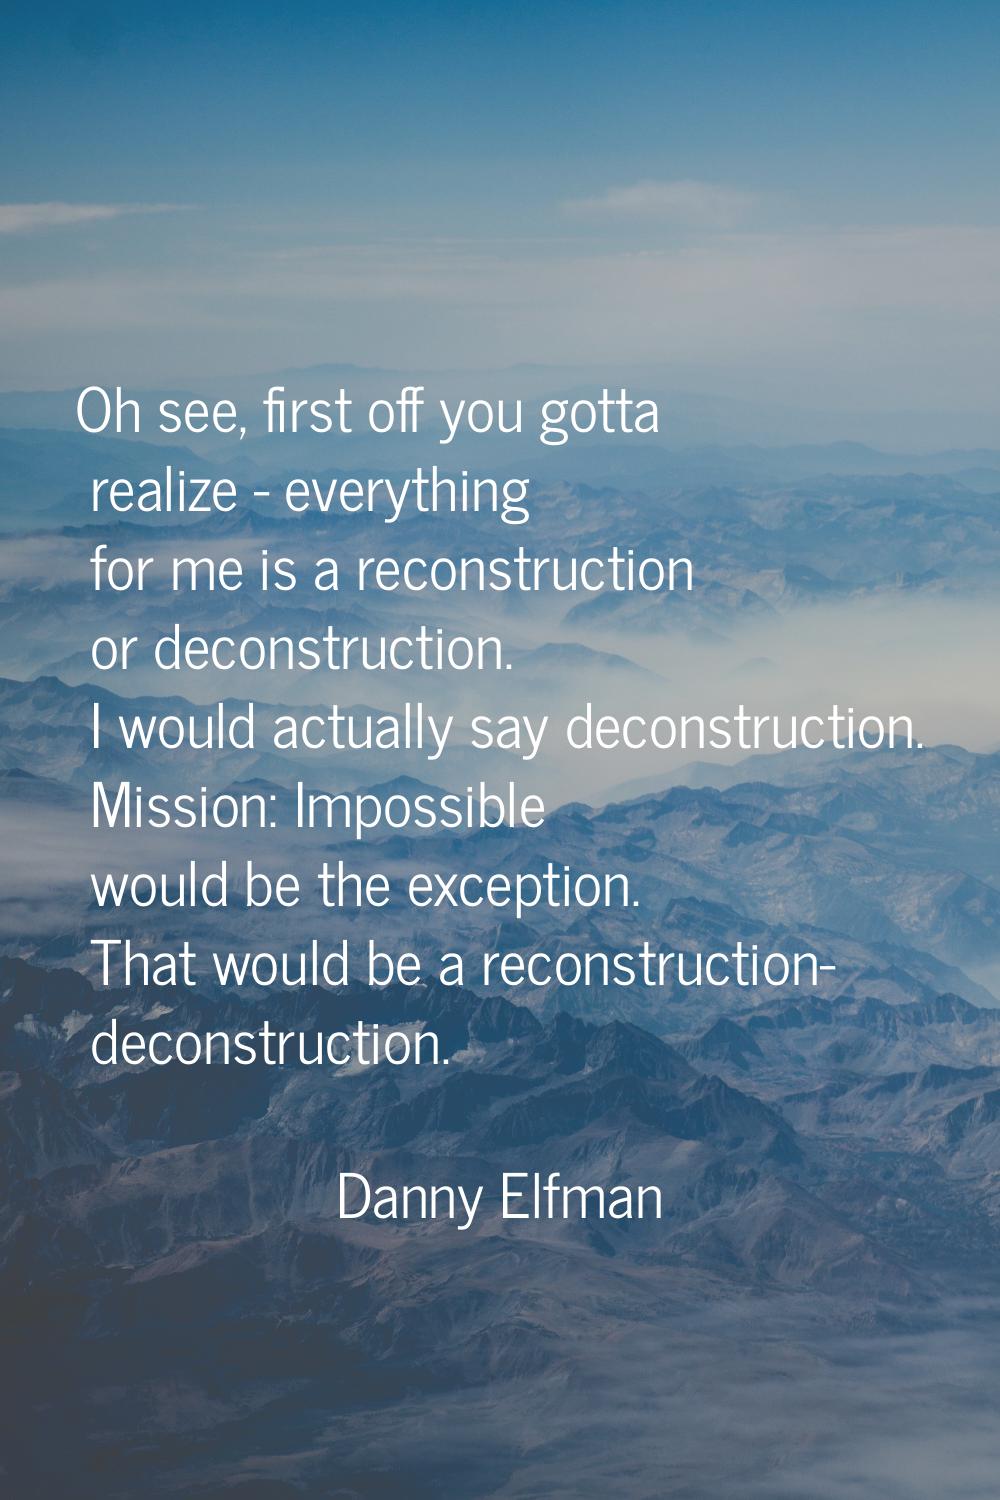 Oh see, first off you gotta realize - everything for me is a reconstruction or deconstruction. I wo